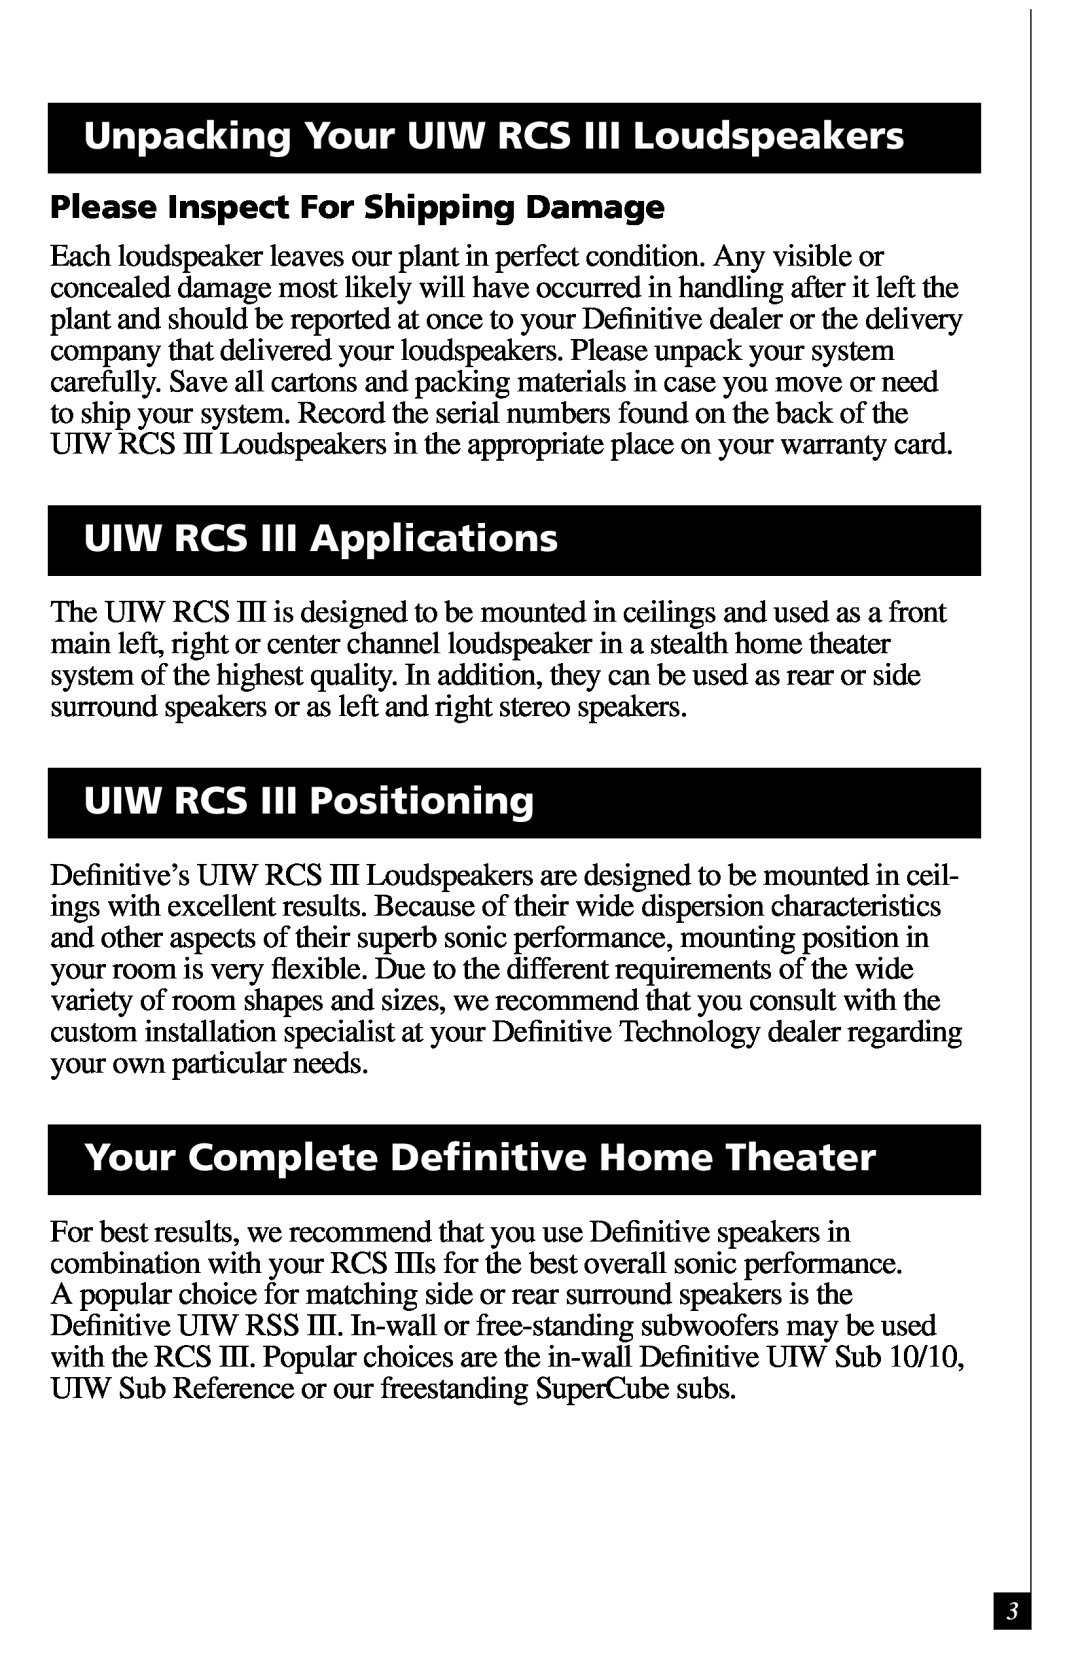 Definitive Technology Reference Series In-Ceiling Speaker Unpacking Your UIW RCS III Loudspeakers, UIW RCS III Positioning 